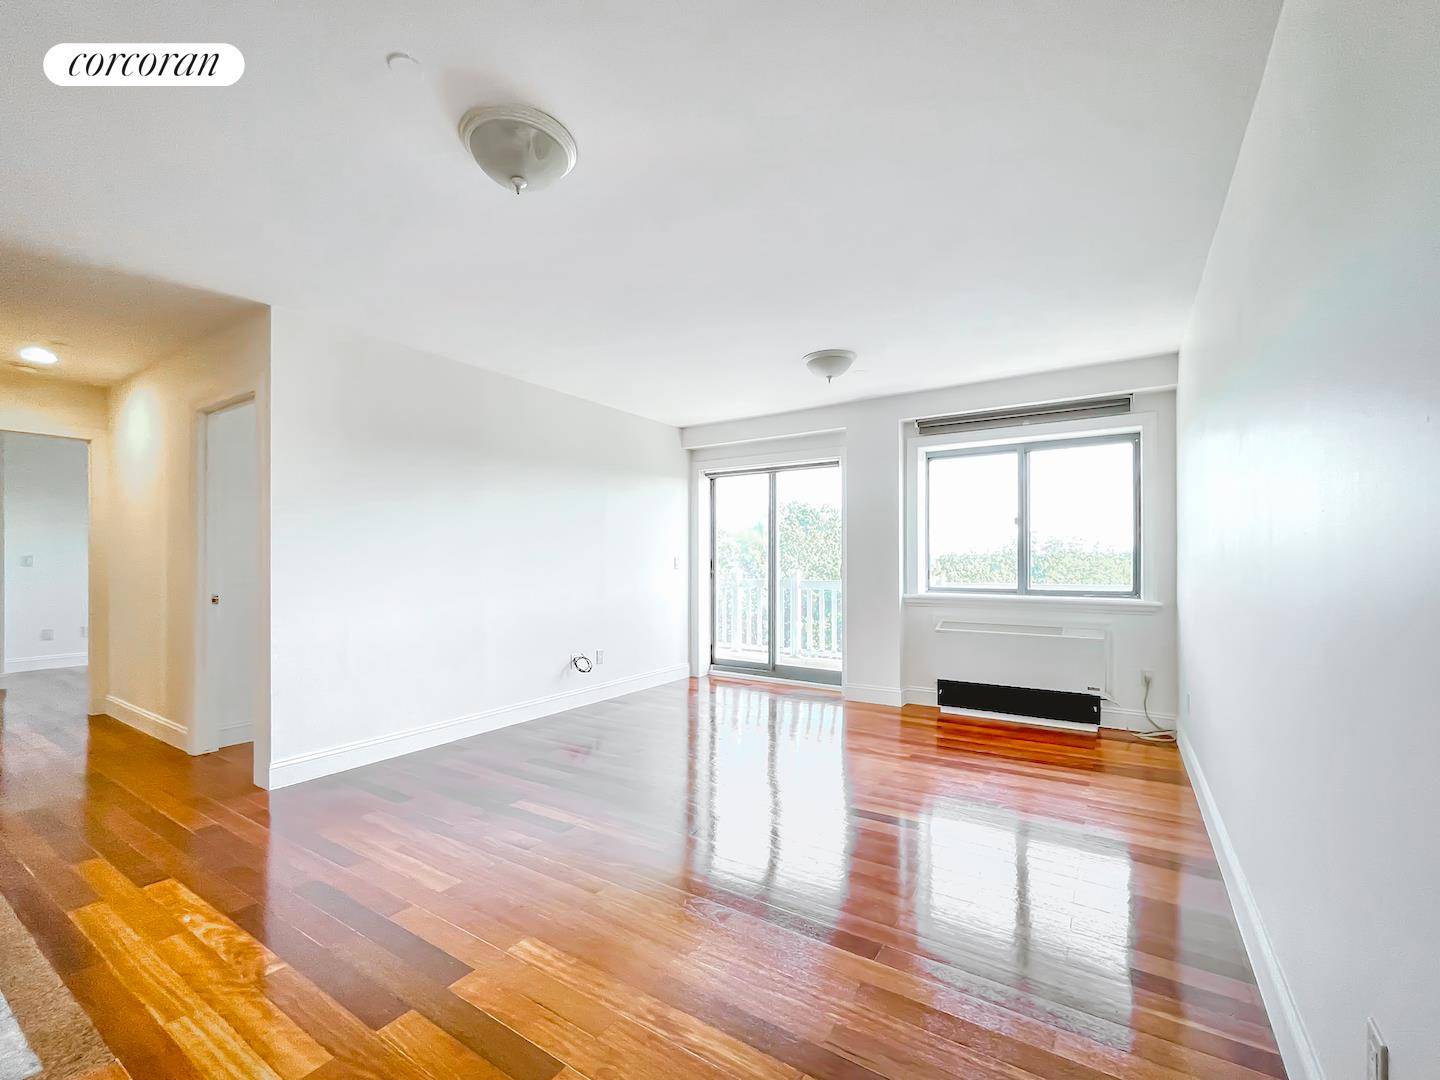 Southern exposure 2 bedroom, 2 bath apartment located in the heart of Downtown Flushing.